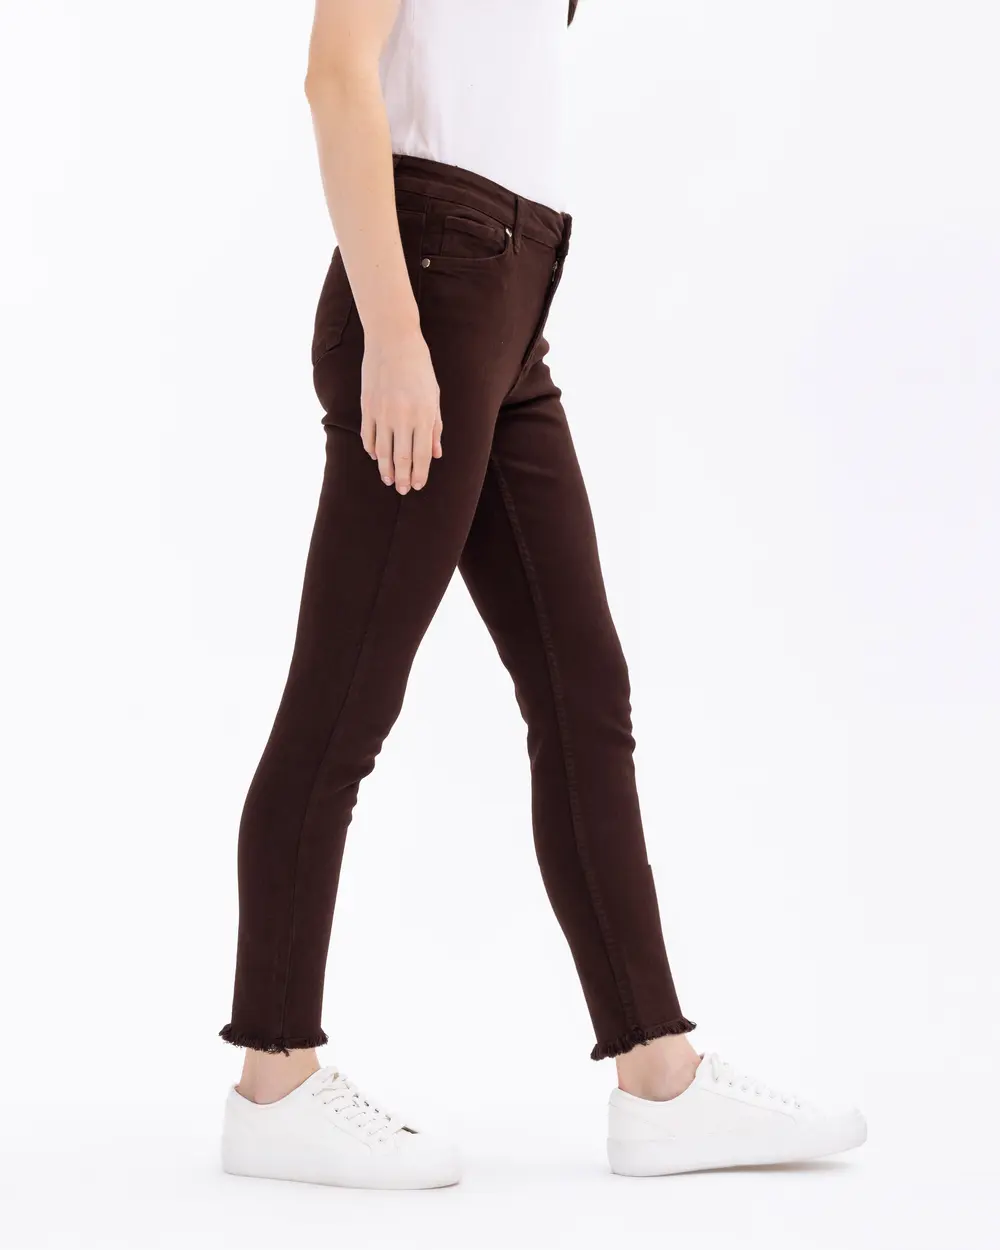 Skinny Ankle-Length Distressed Pants